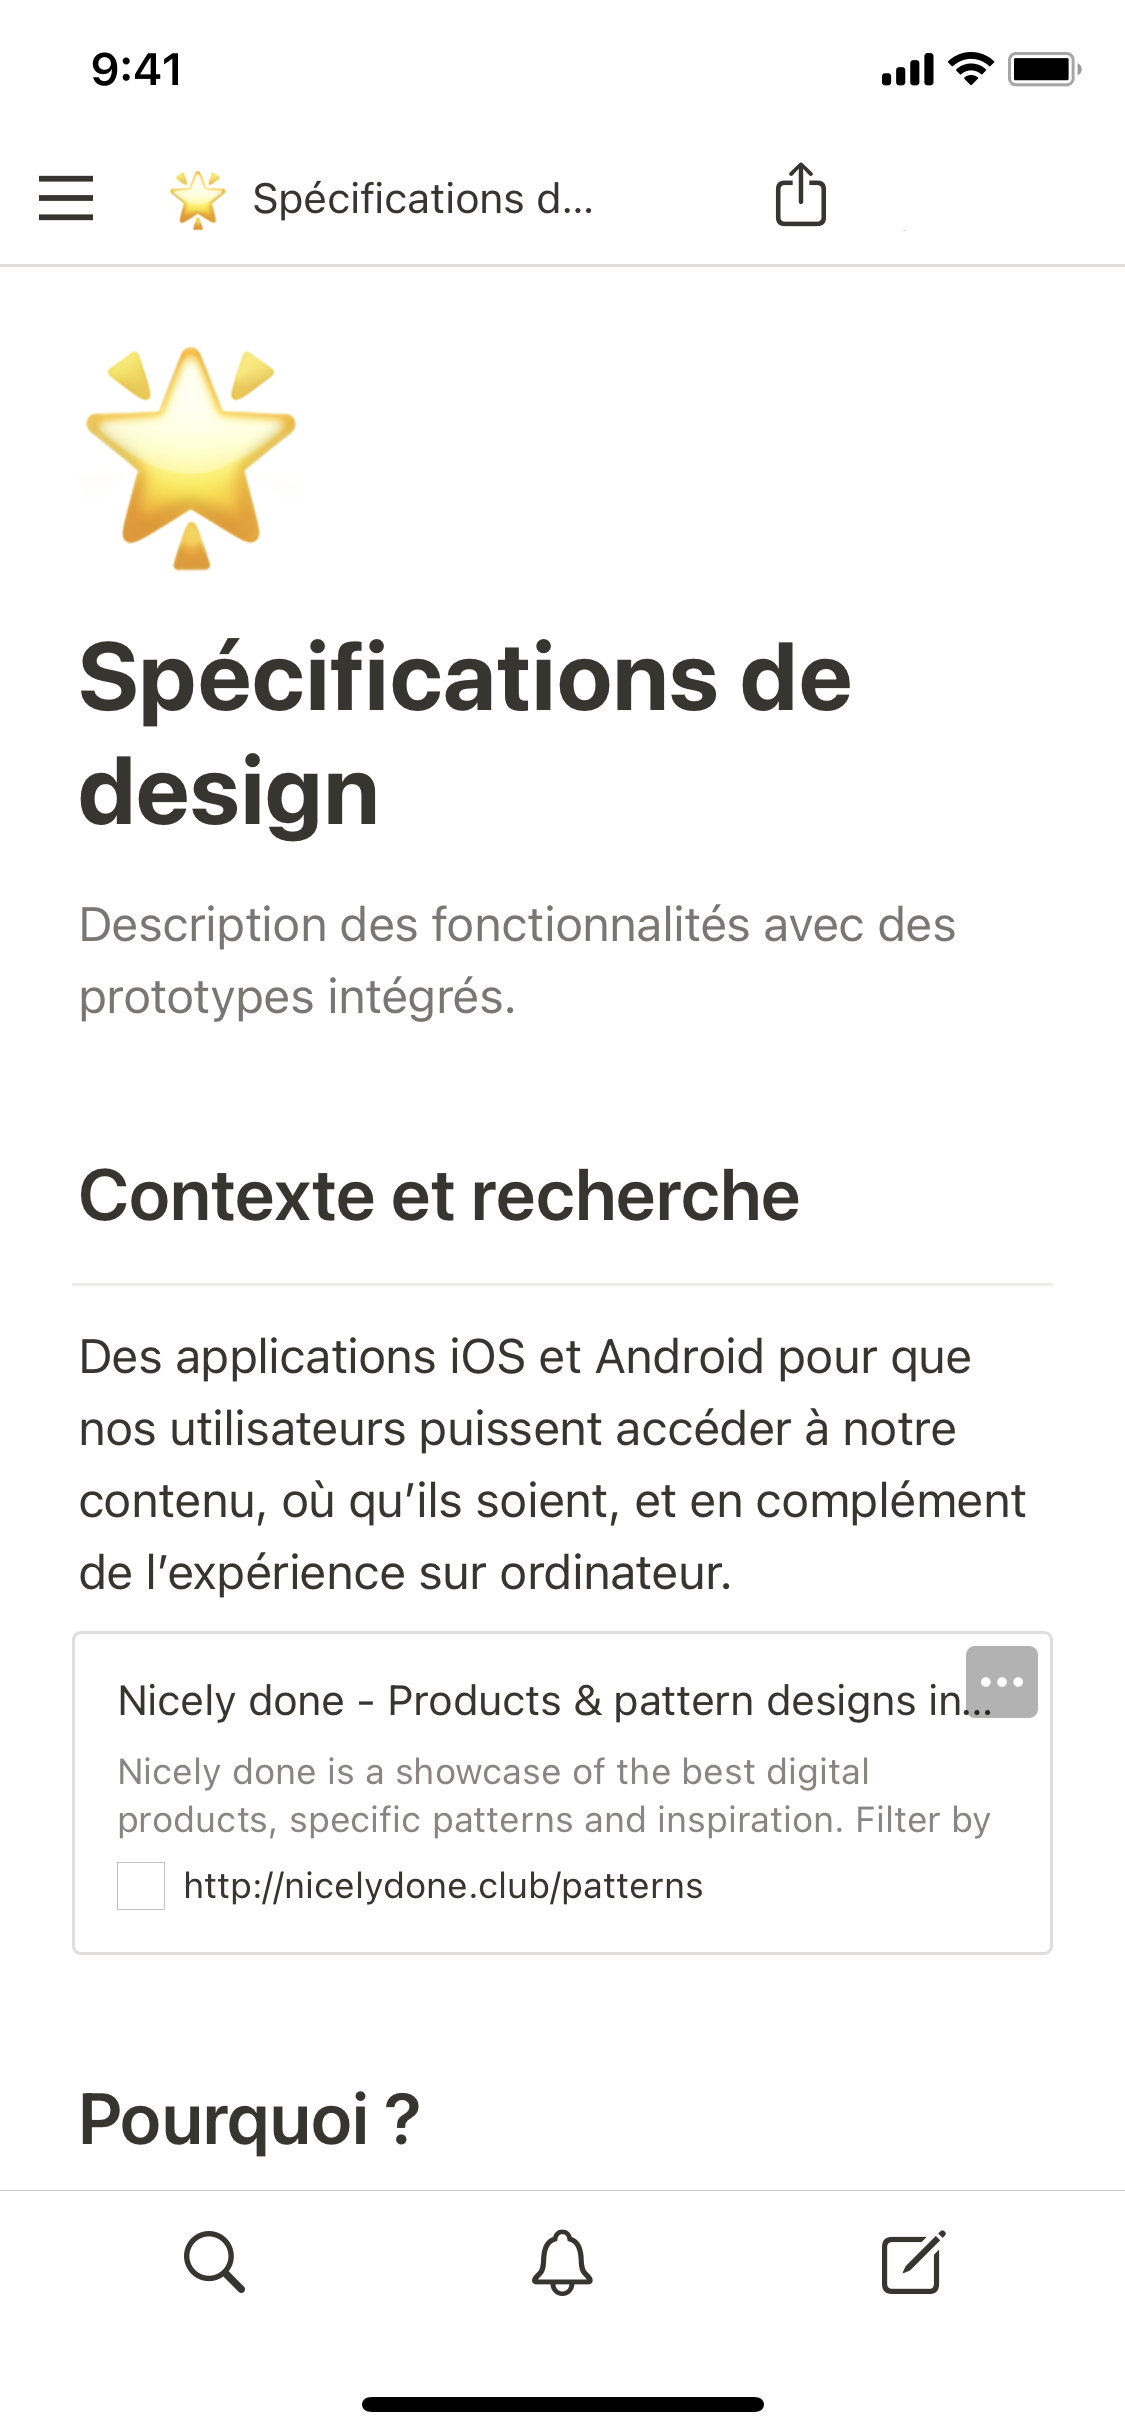 The mobile image for the Design spec template